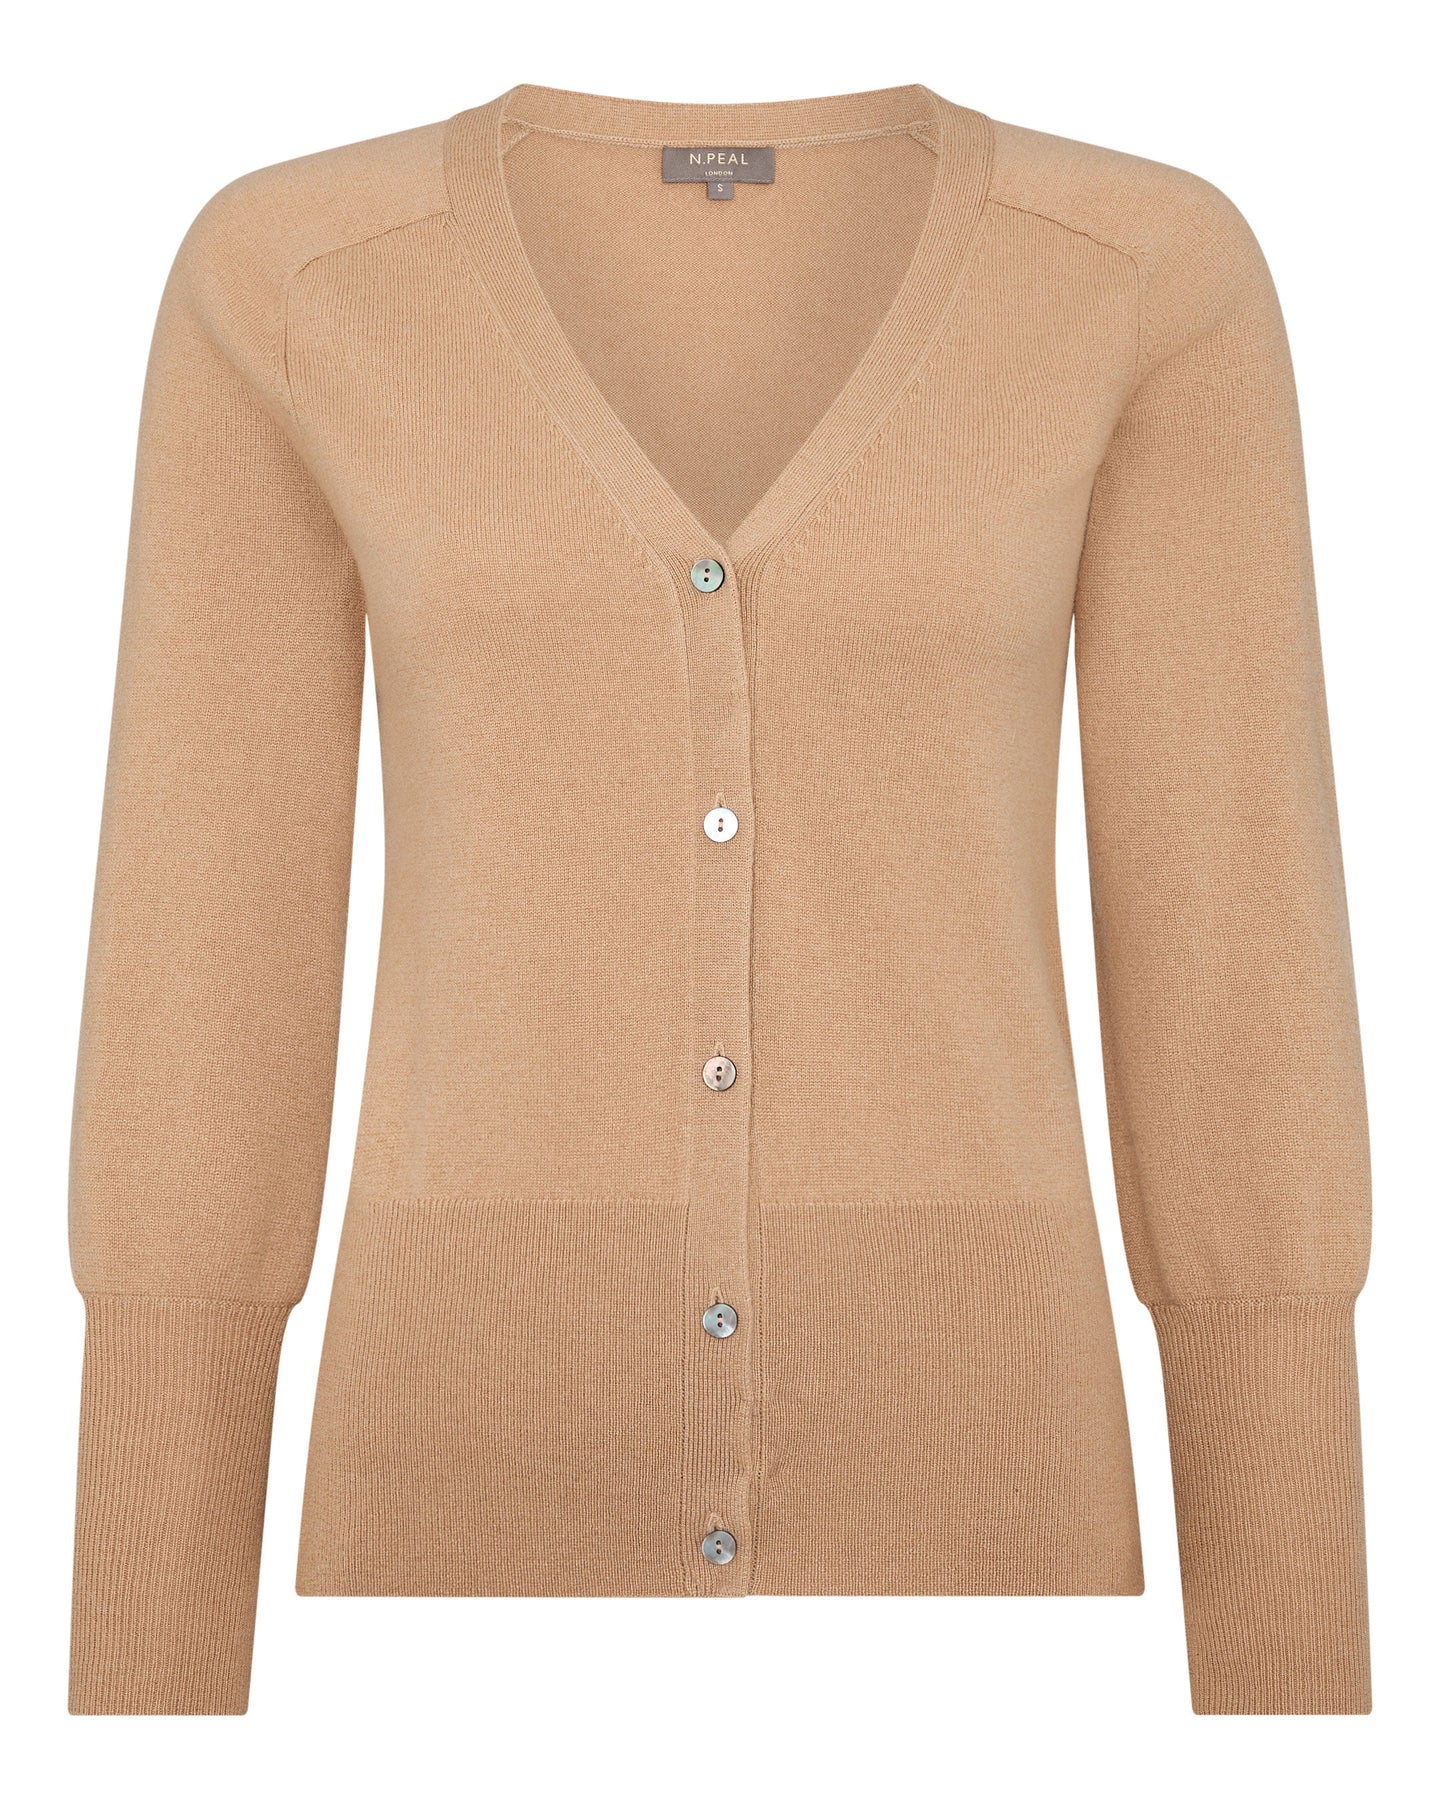 N.Peal Women's V Necked Cashmere Cardigan Sahara Brown